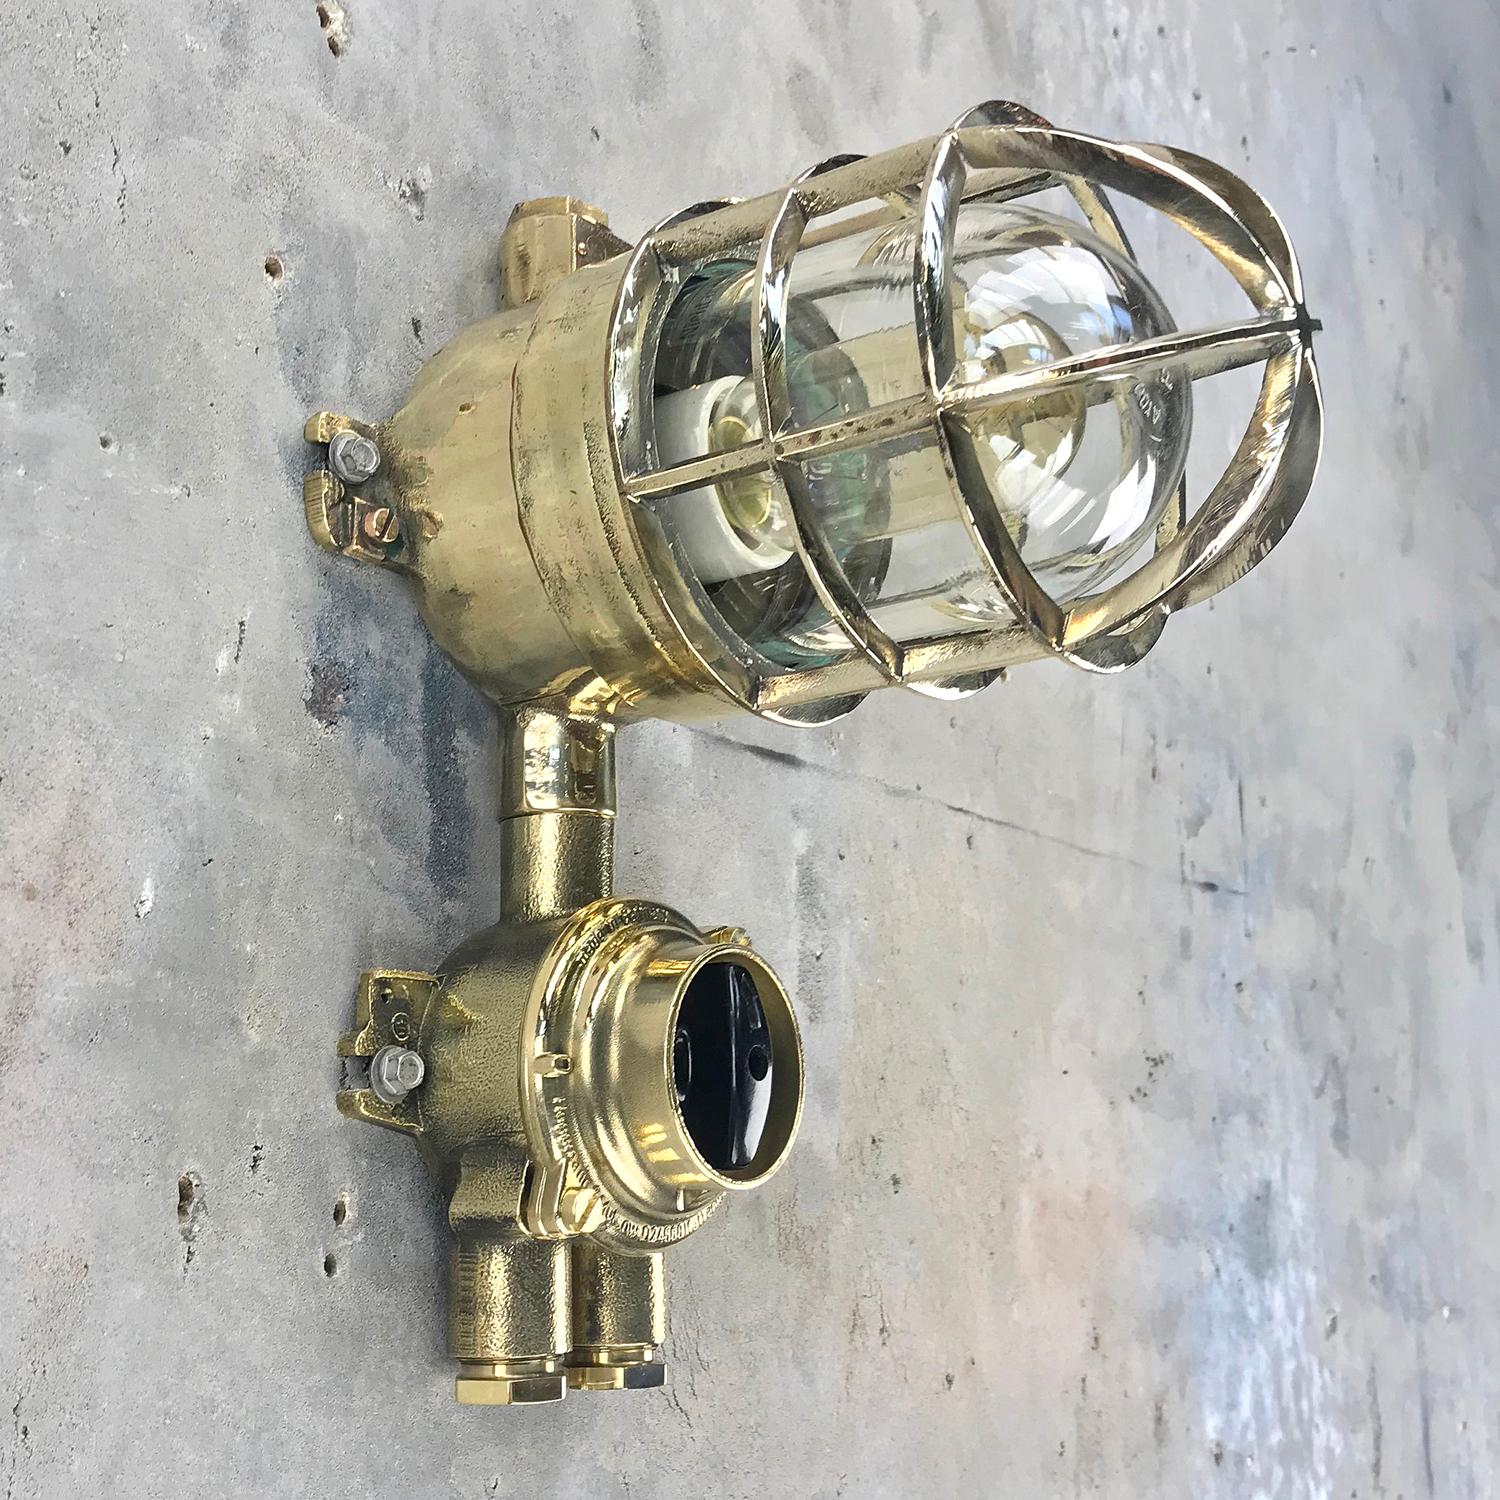 1970s German Explosion Proof Wall Light Cast Brass, Glass Shade & Rotary Switch For Sale 8